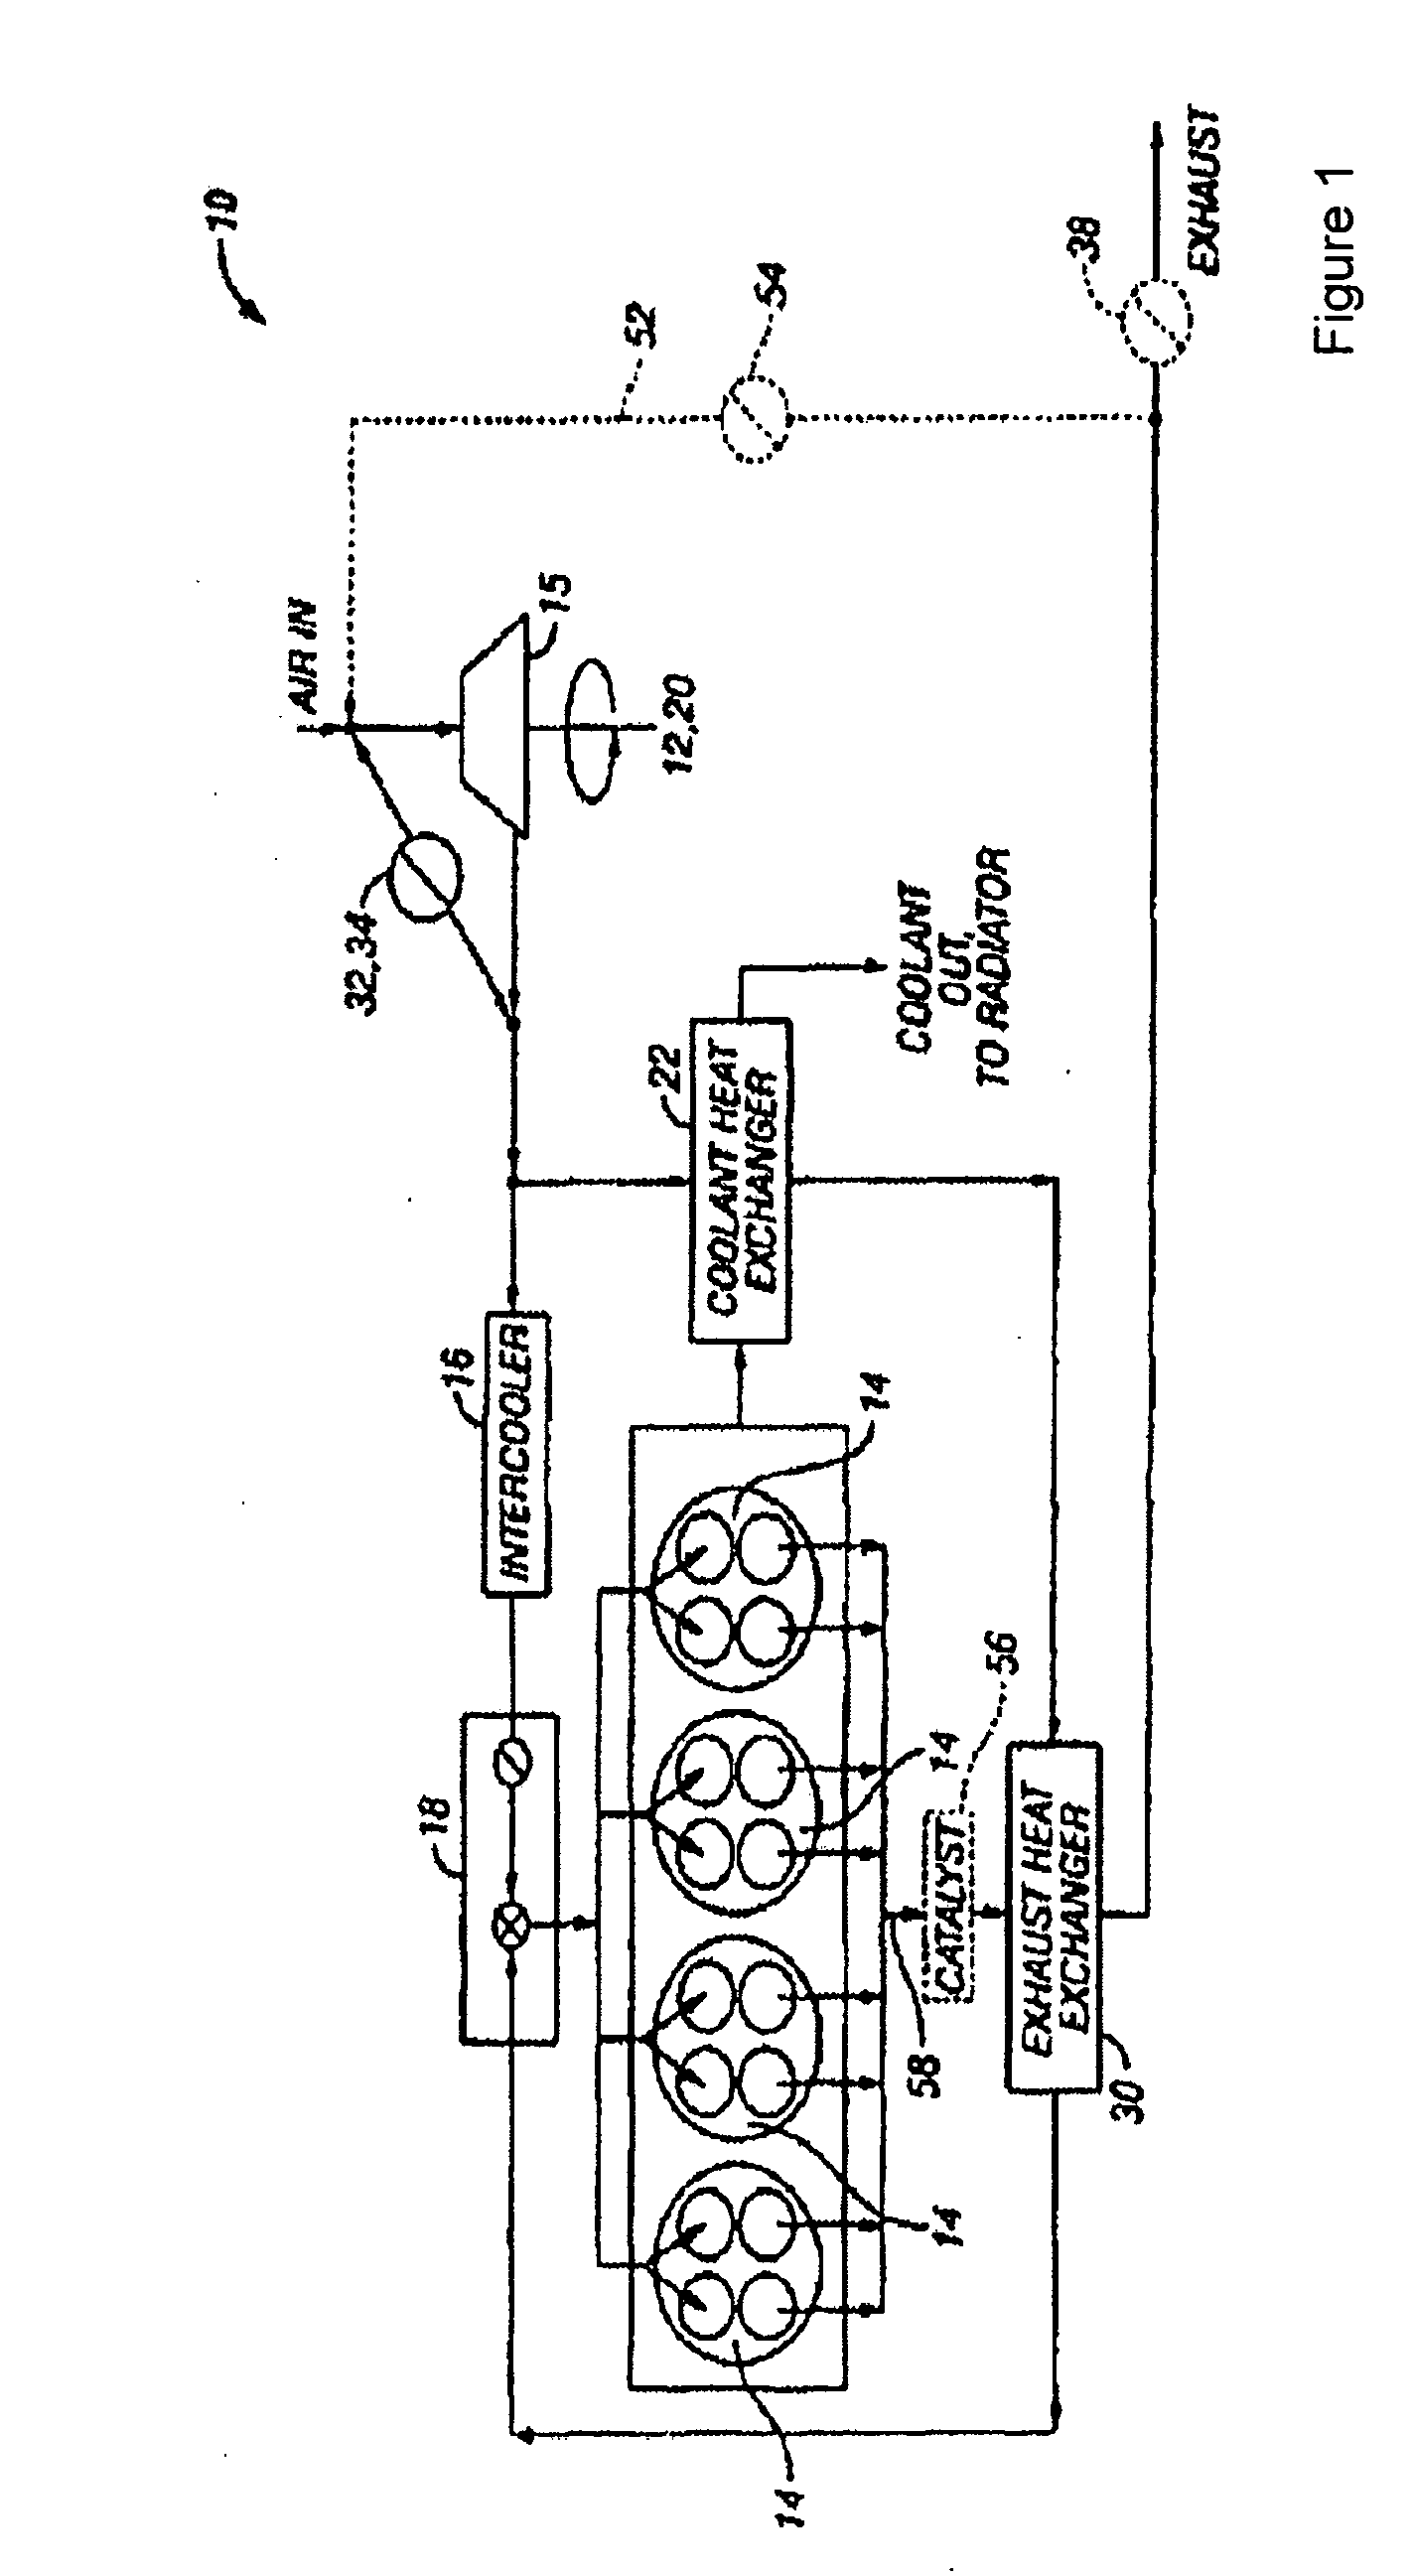 System and method for improved engine starting using heated intake air